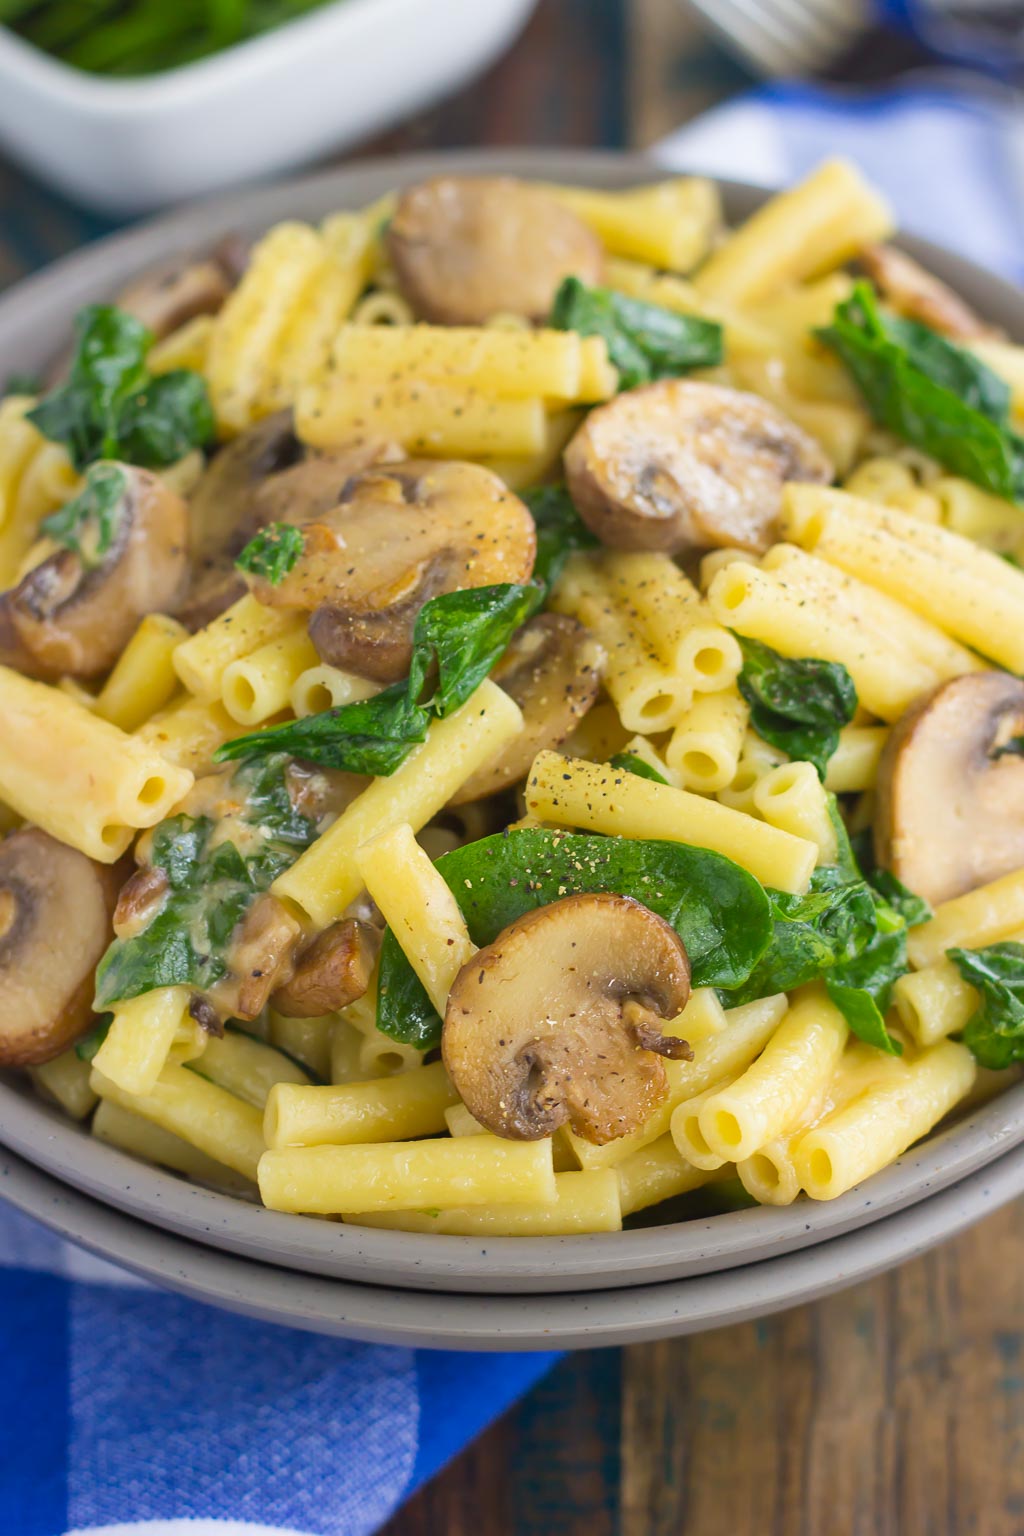 This Garlic Parmesan Pasta with Spinach and Mushrooms is an easy, 20 minute meal that the whole family will enjoy. Filled with fresh mushrooms, spinach, garlic and Parmesan cheese, this creamy pasta is bursting with flavor and ready in no time!